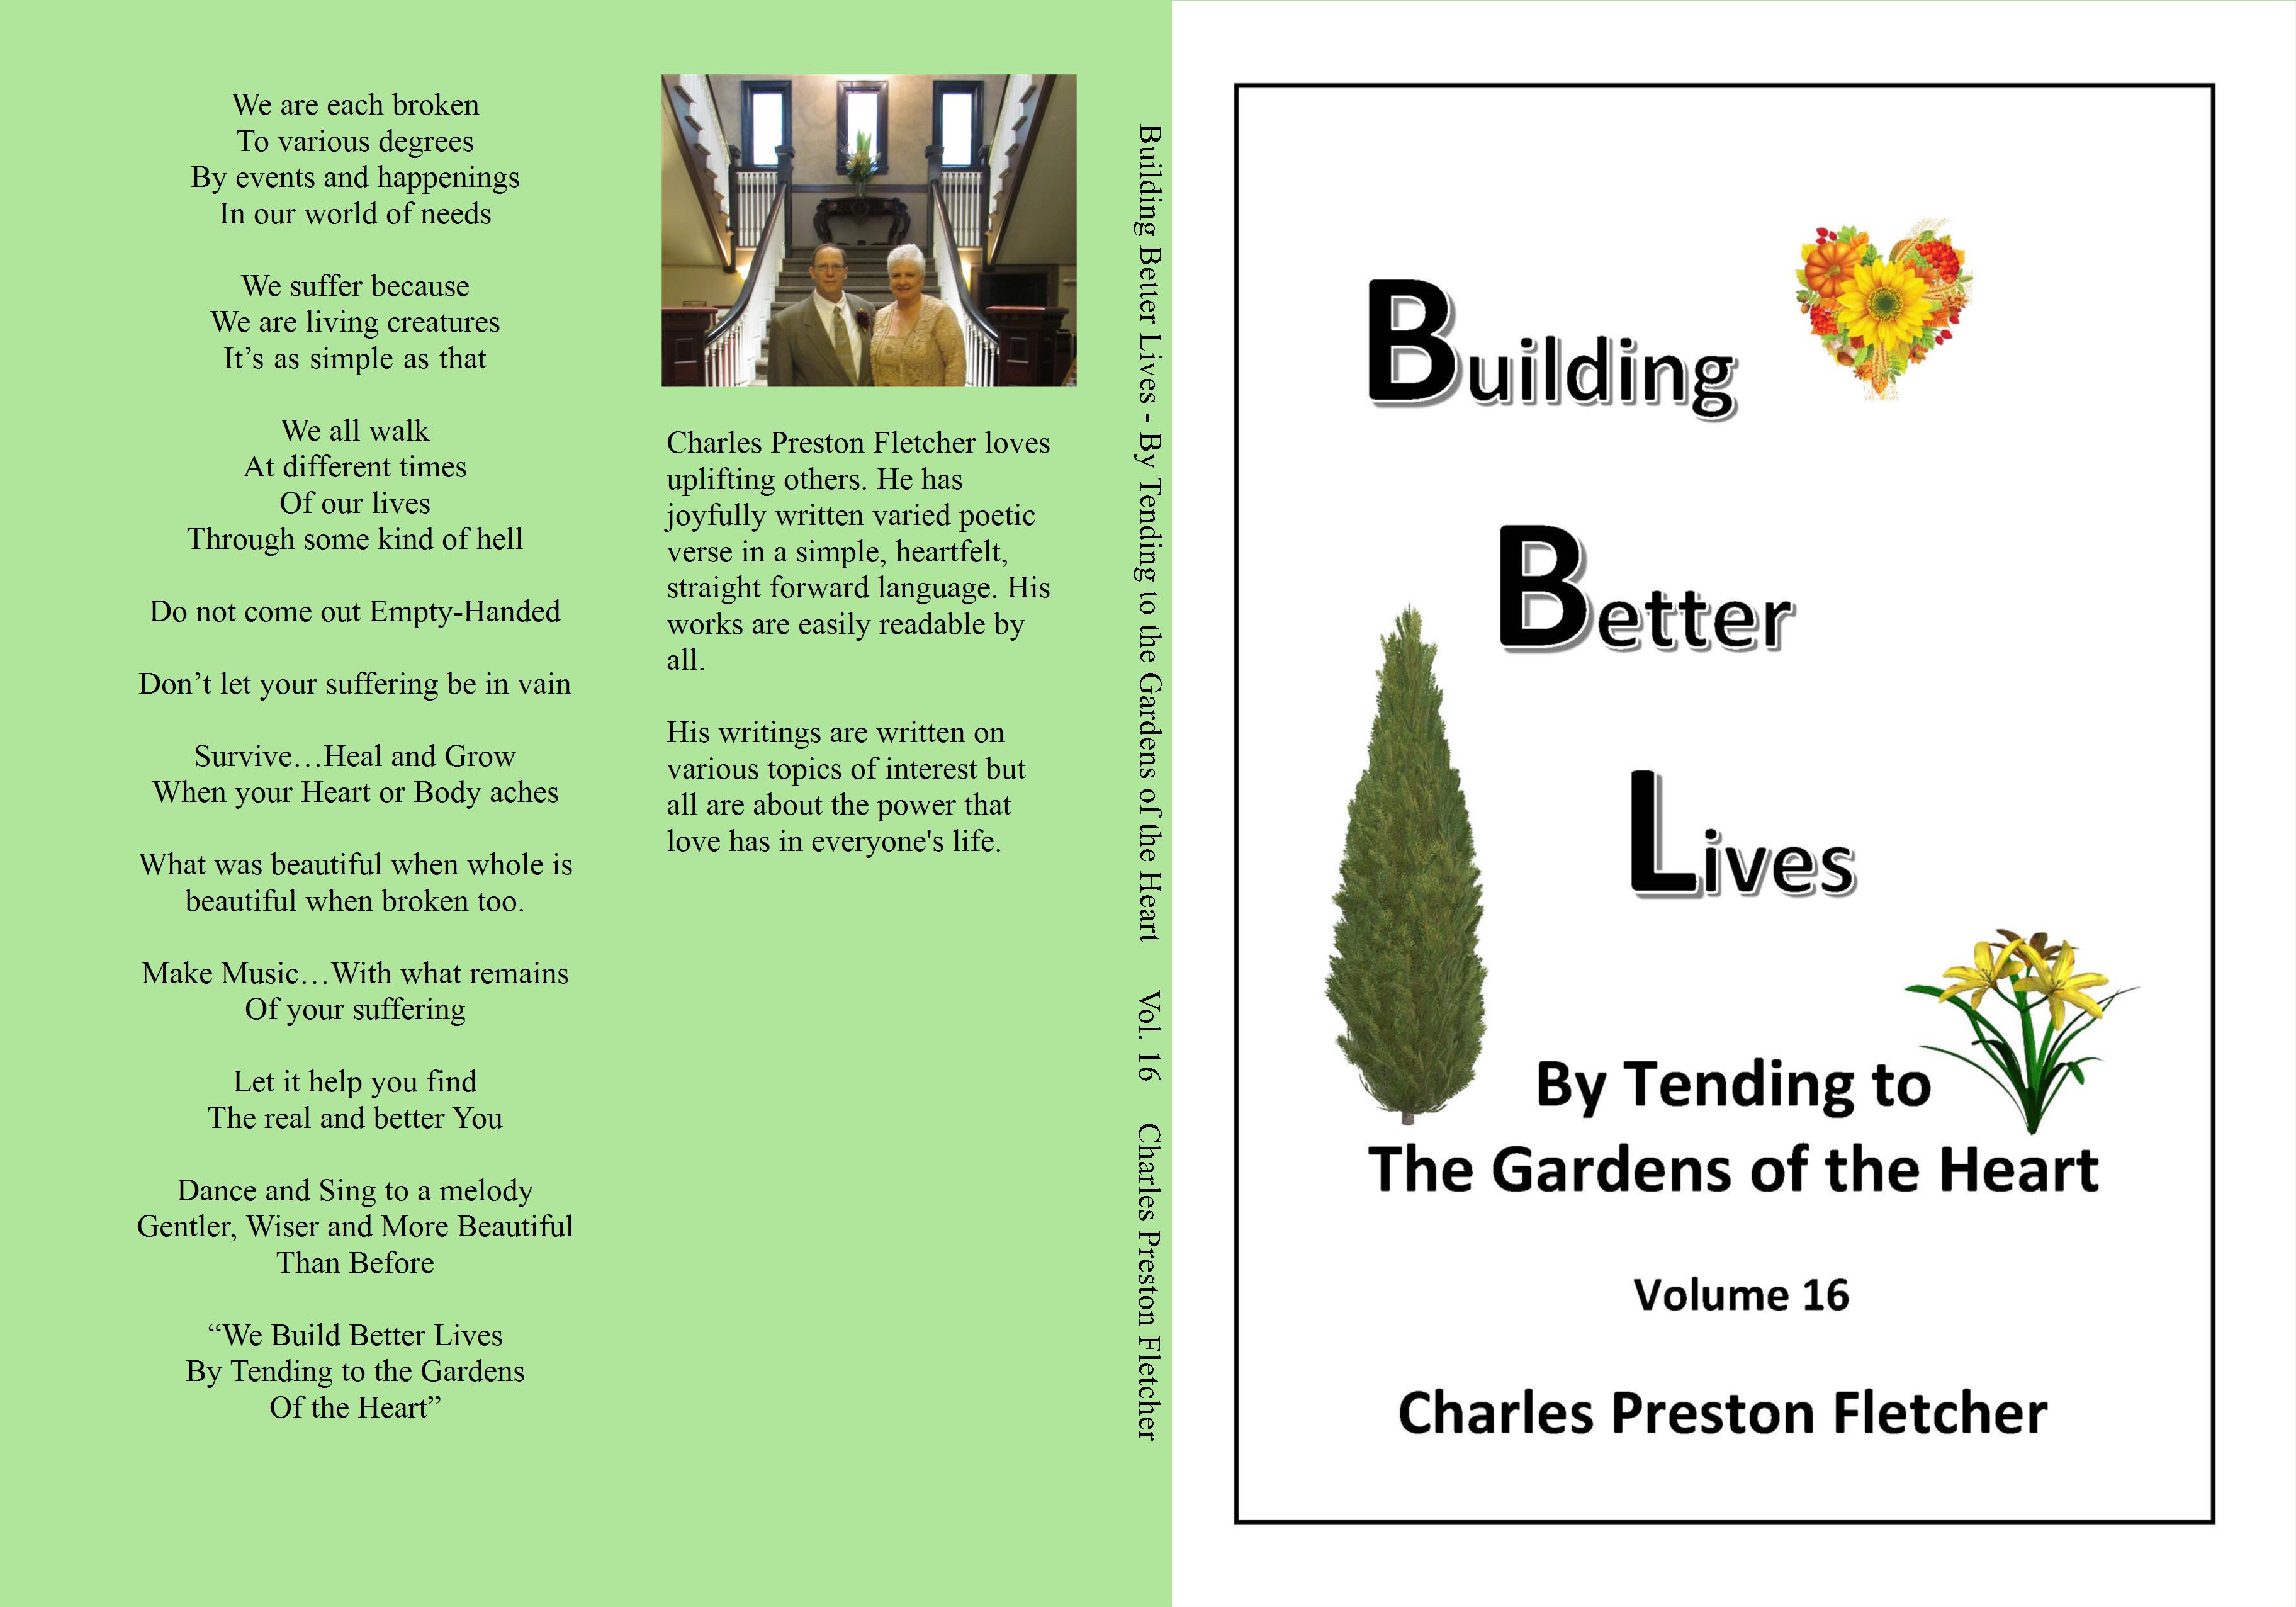 Building Better Lives - By Tending to the Gardens of the Heart cover image